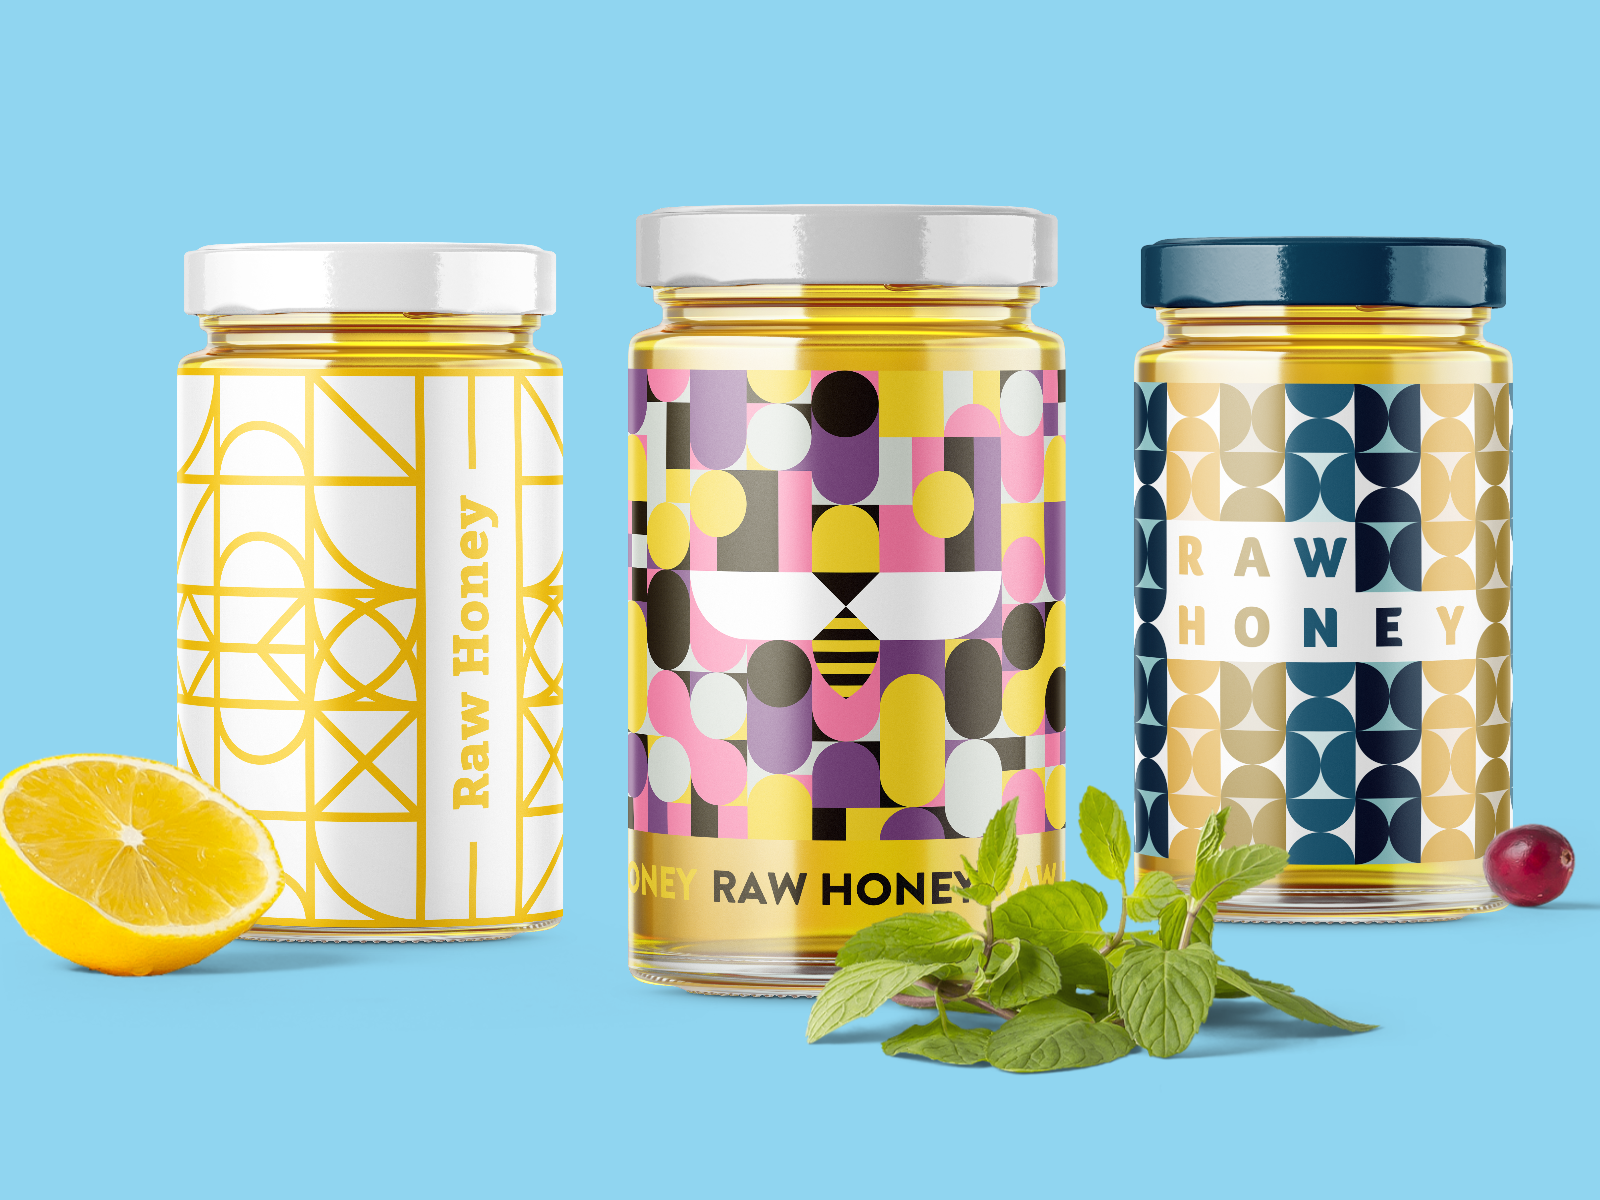 Download Honey Jars With Blocco Patterns By Mariana For Woohoo On Dribbble PSD Mockup Templates